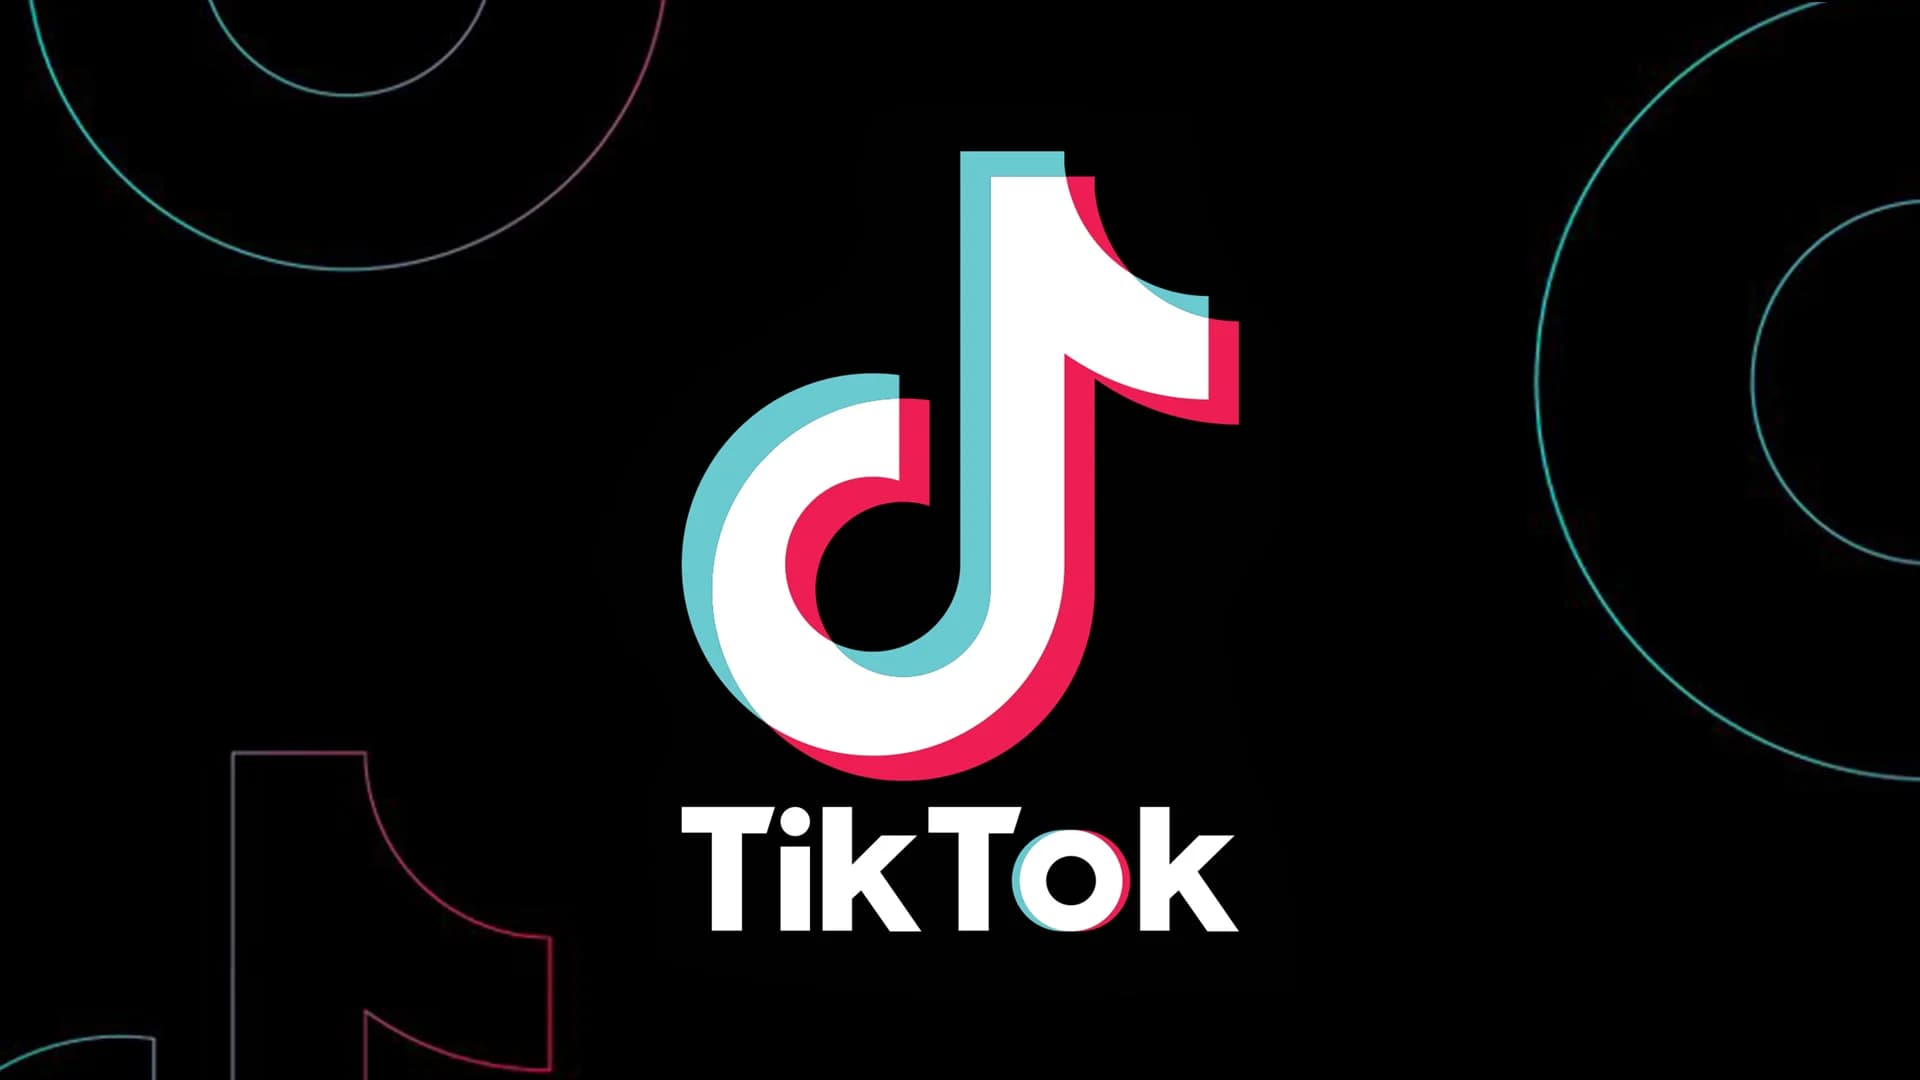 NYC bans use of TikTok on city-owned phones, joining federal government, majority of states